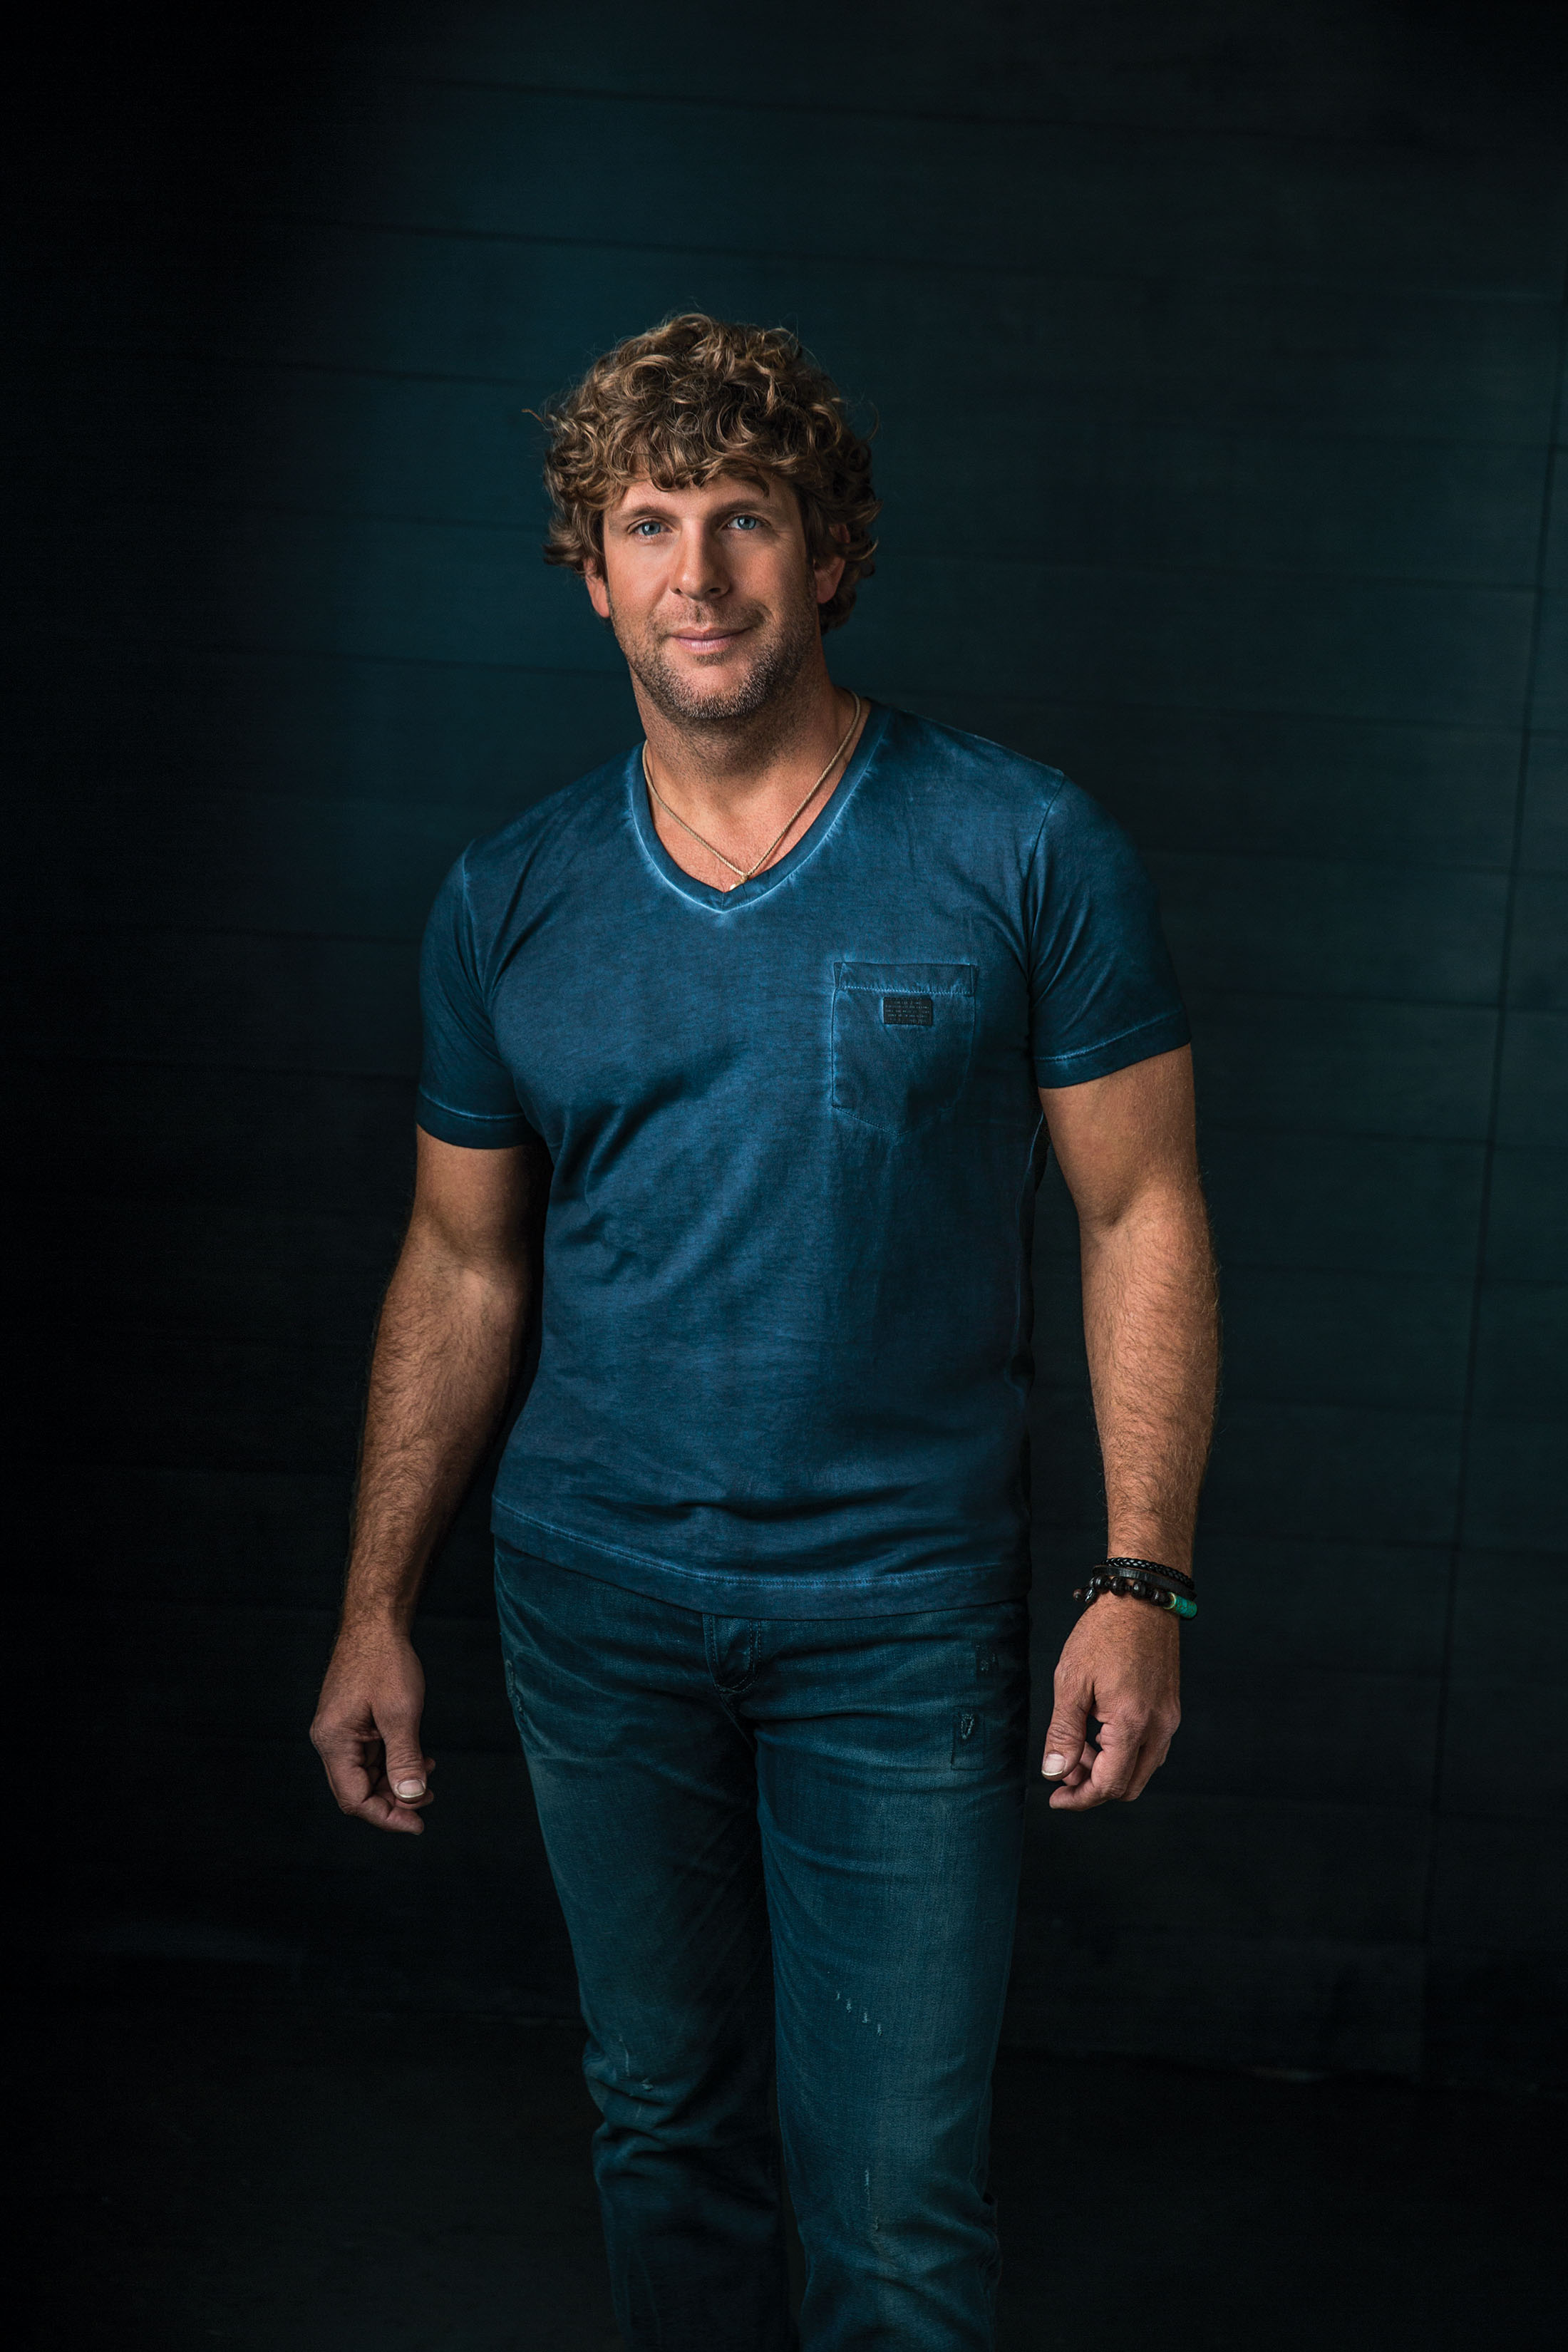 Billy Currington Talks New Album, Tour and More.